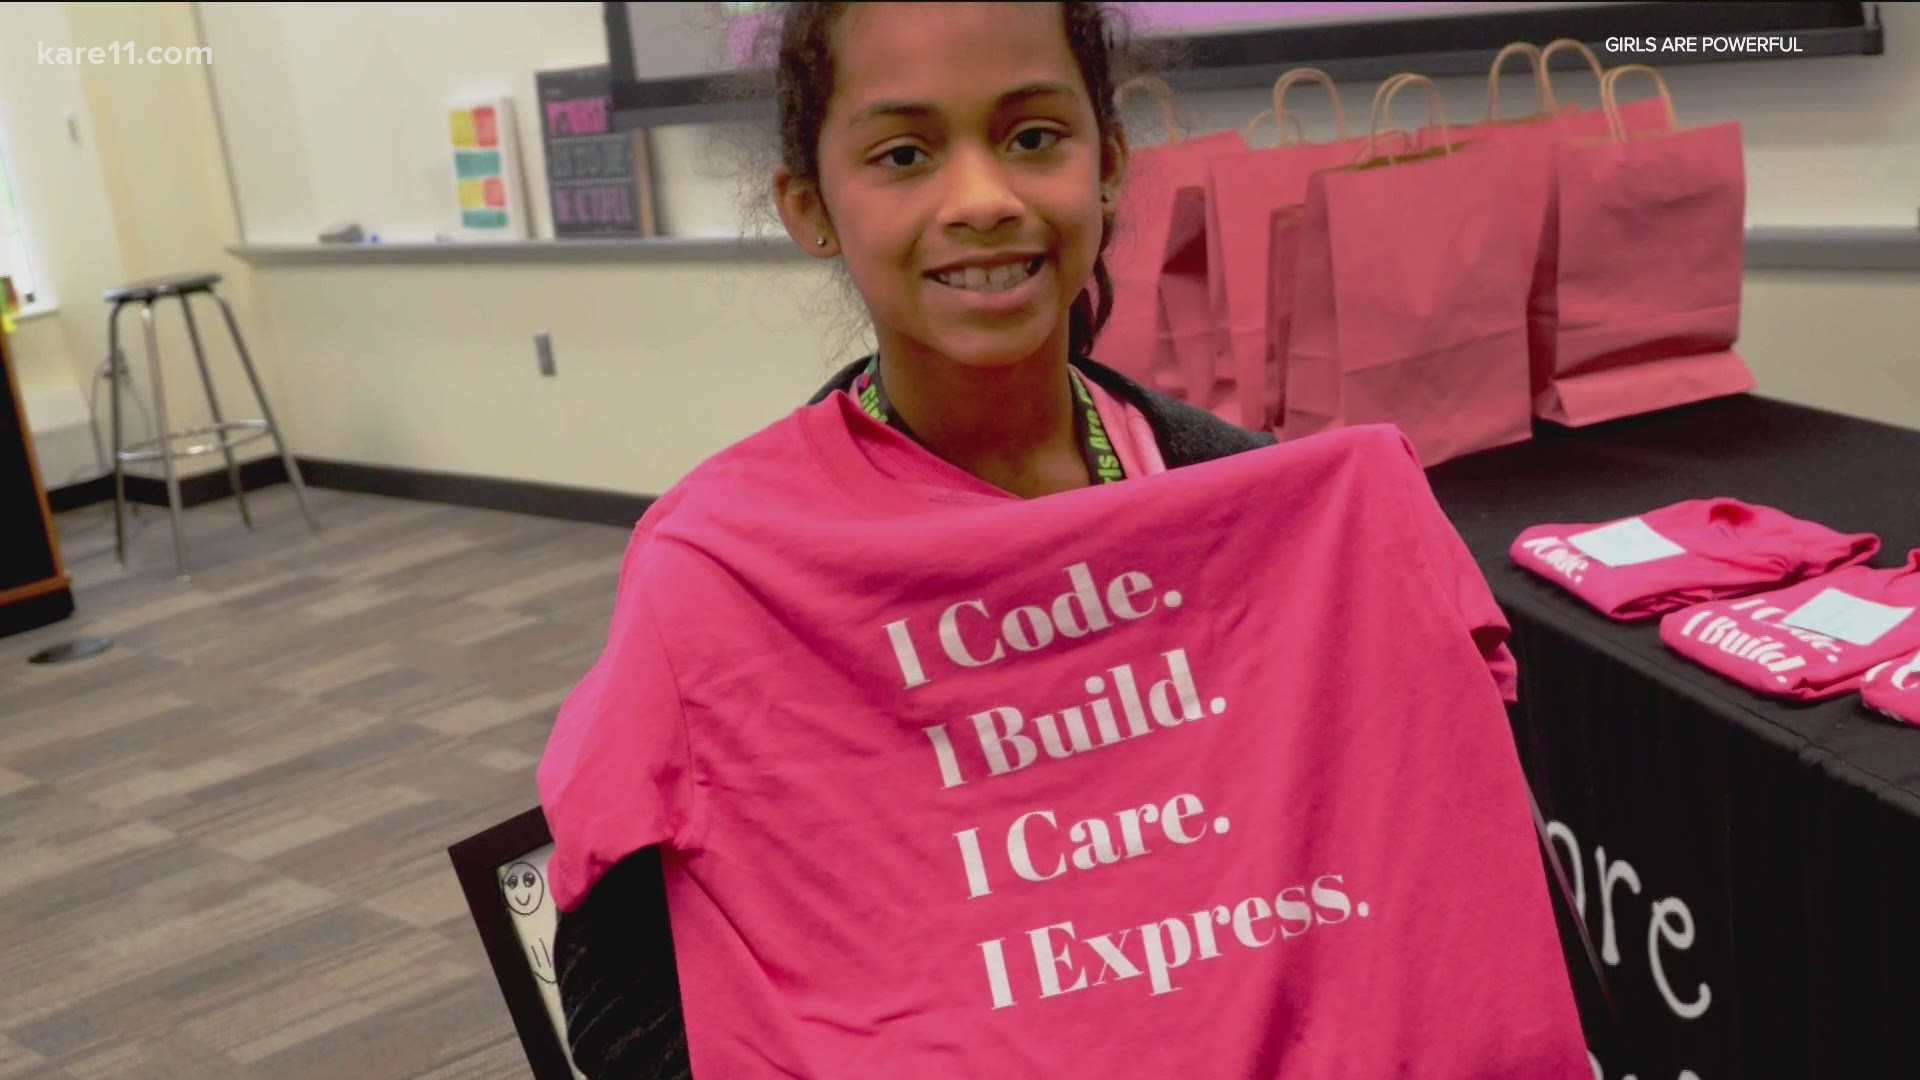 A local mother created this Twin Cities nonprofits to help teach girls to love themselves.